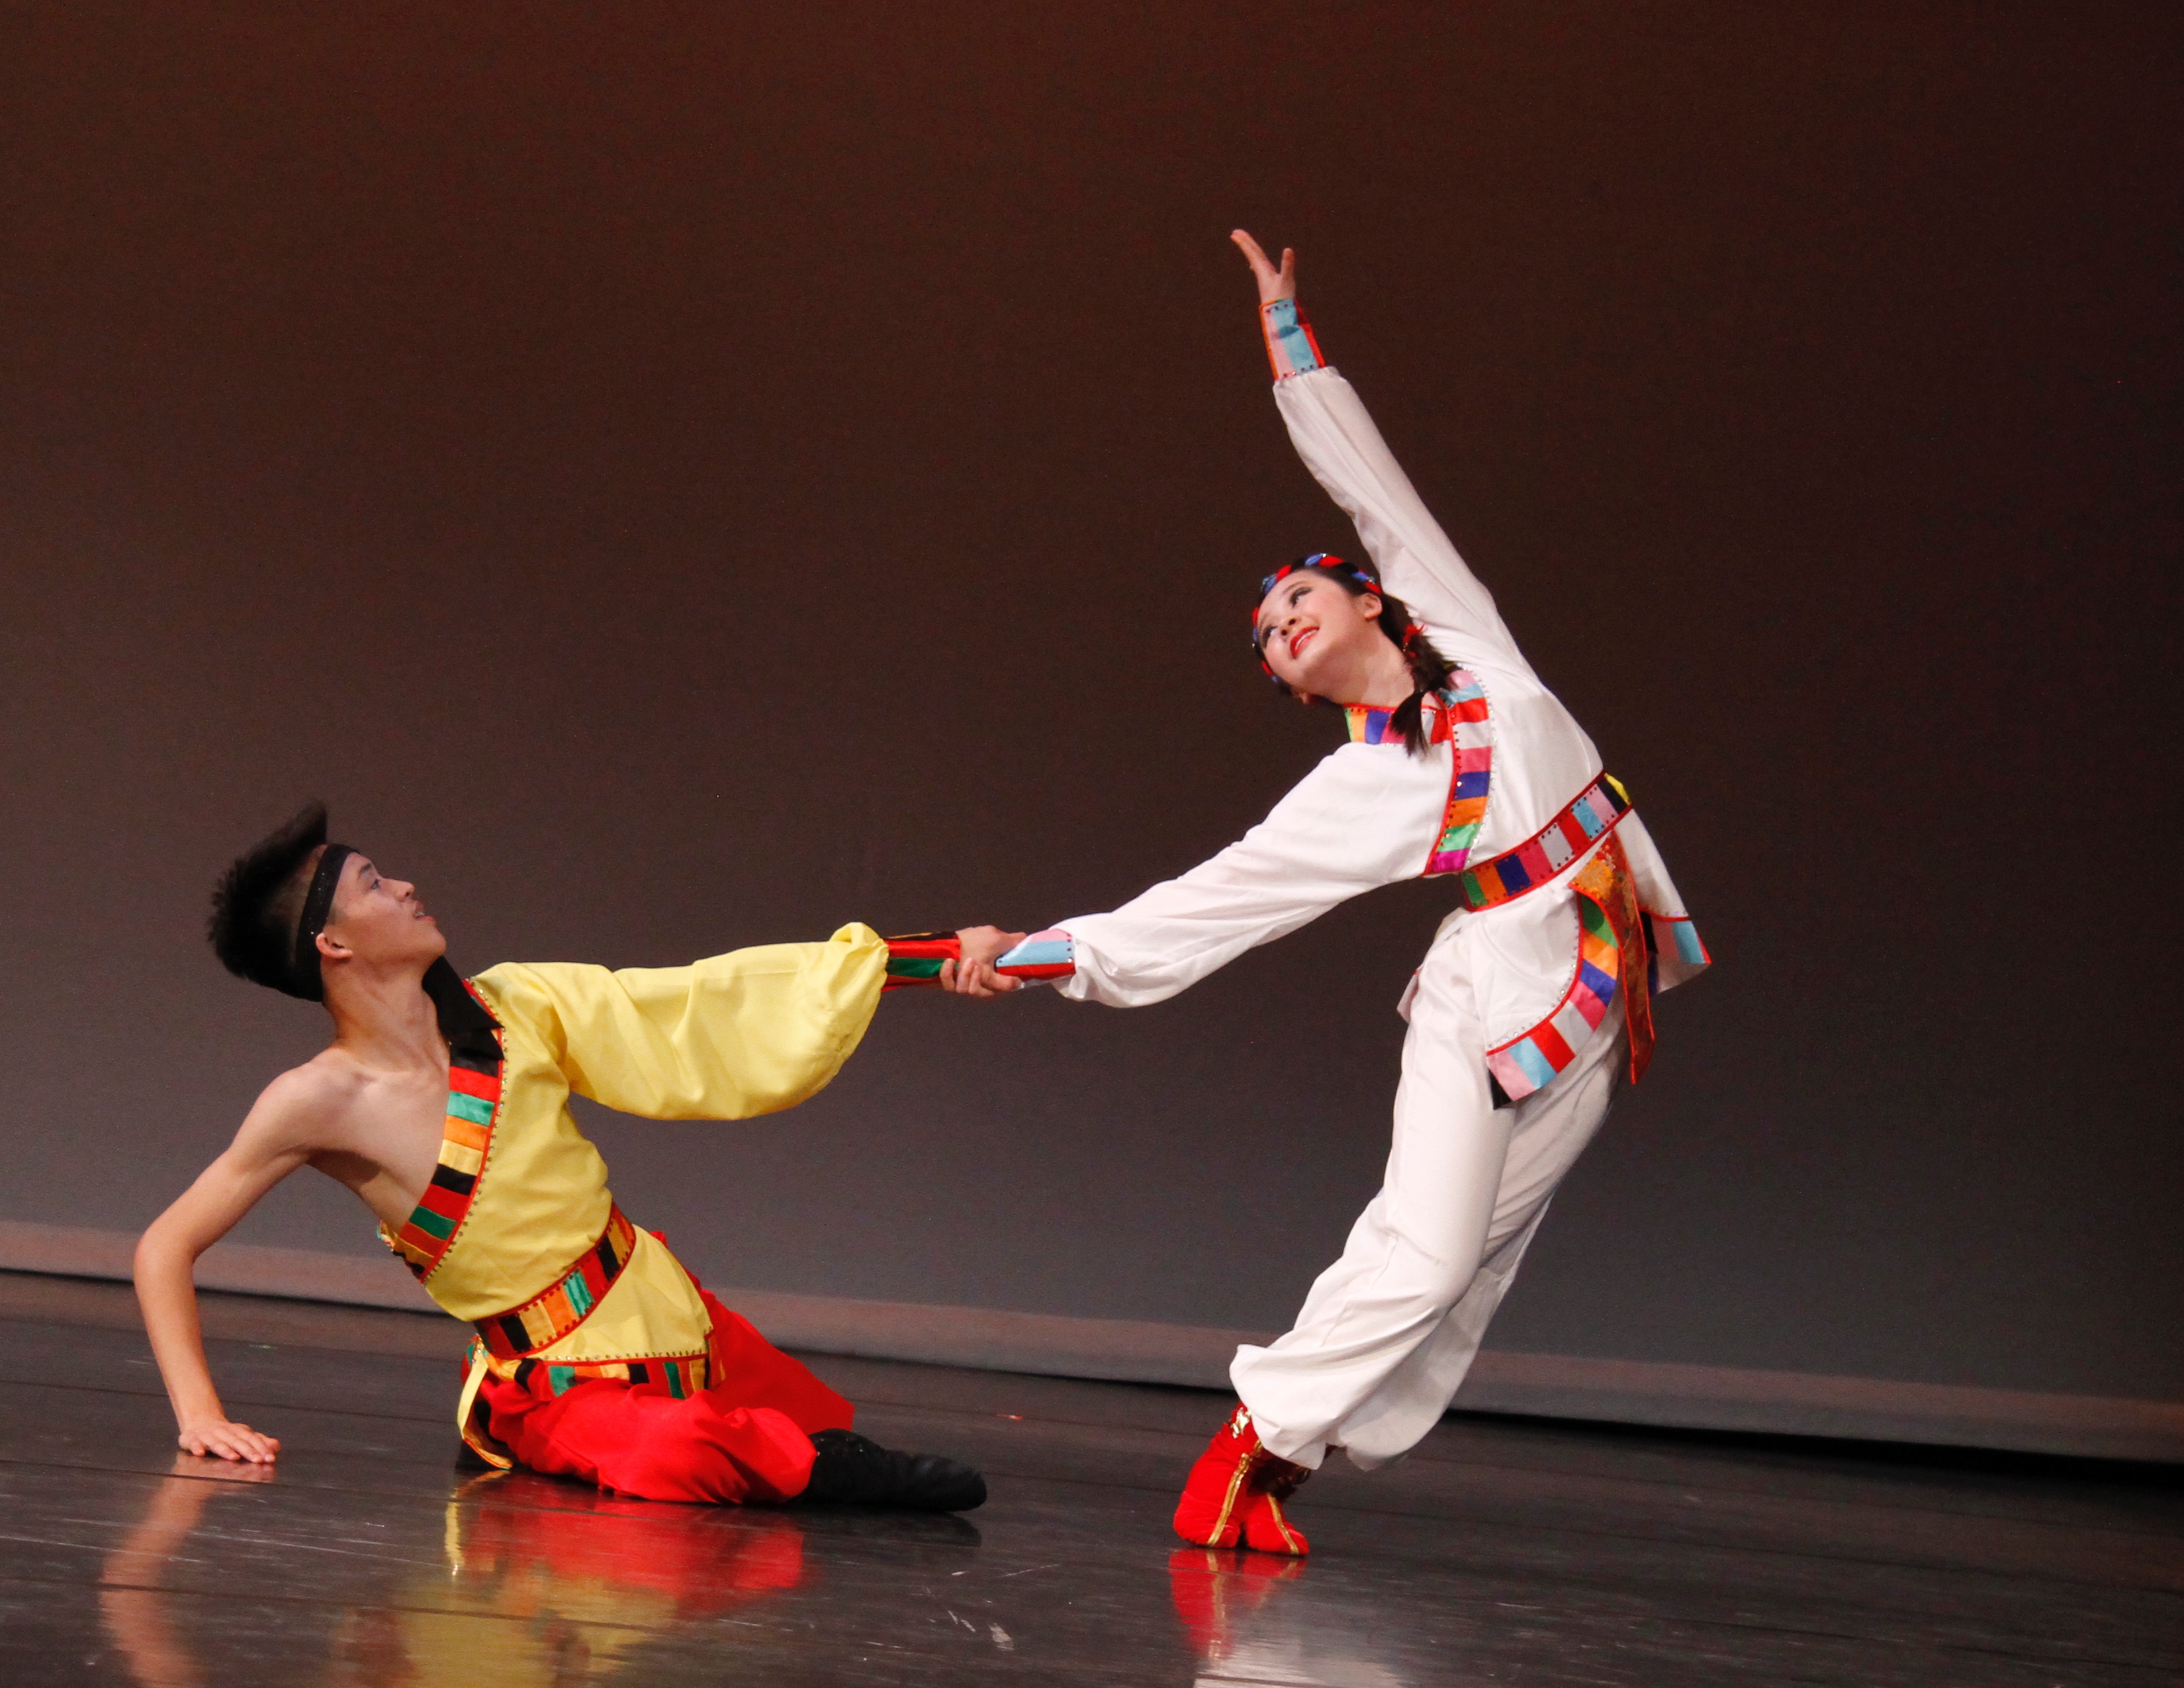 Lorita Leung Dance Co., showcases Chinese dance in Moscow | Inland 360